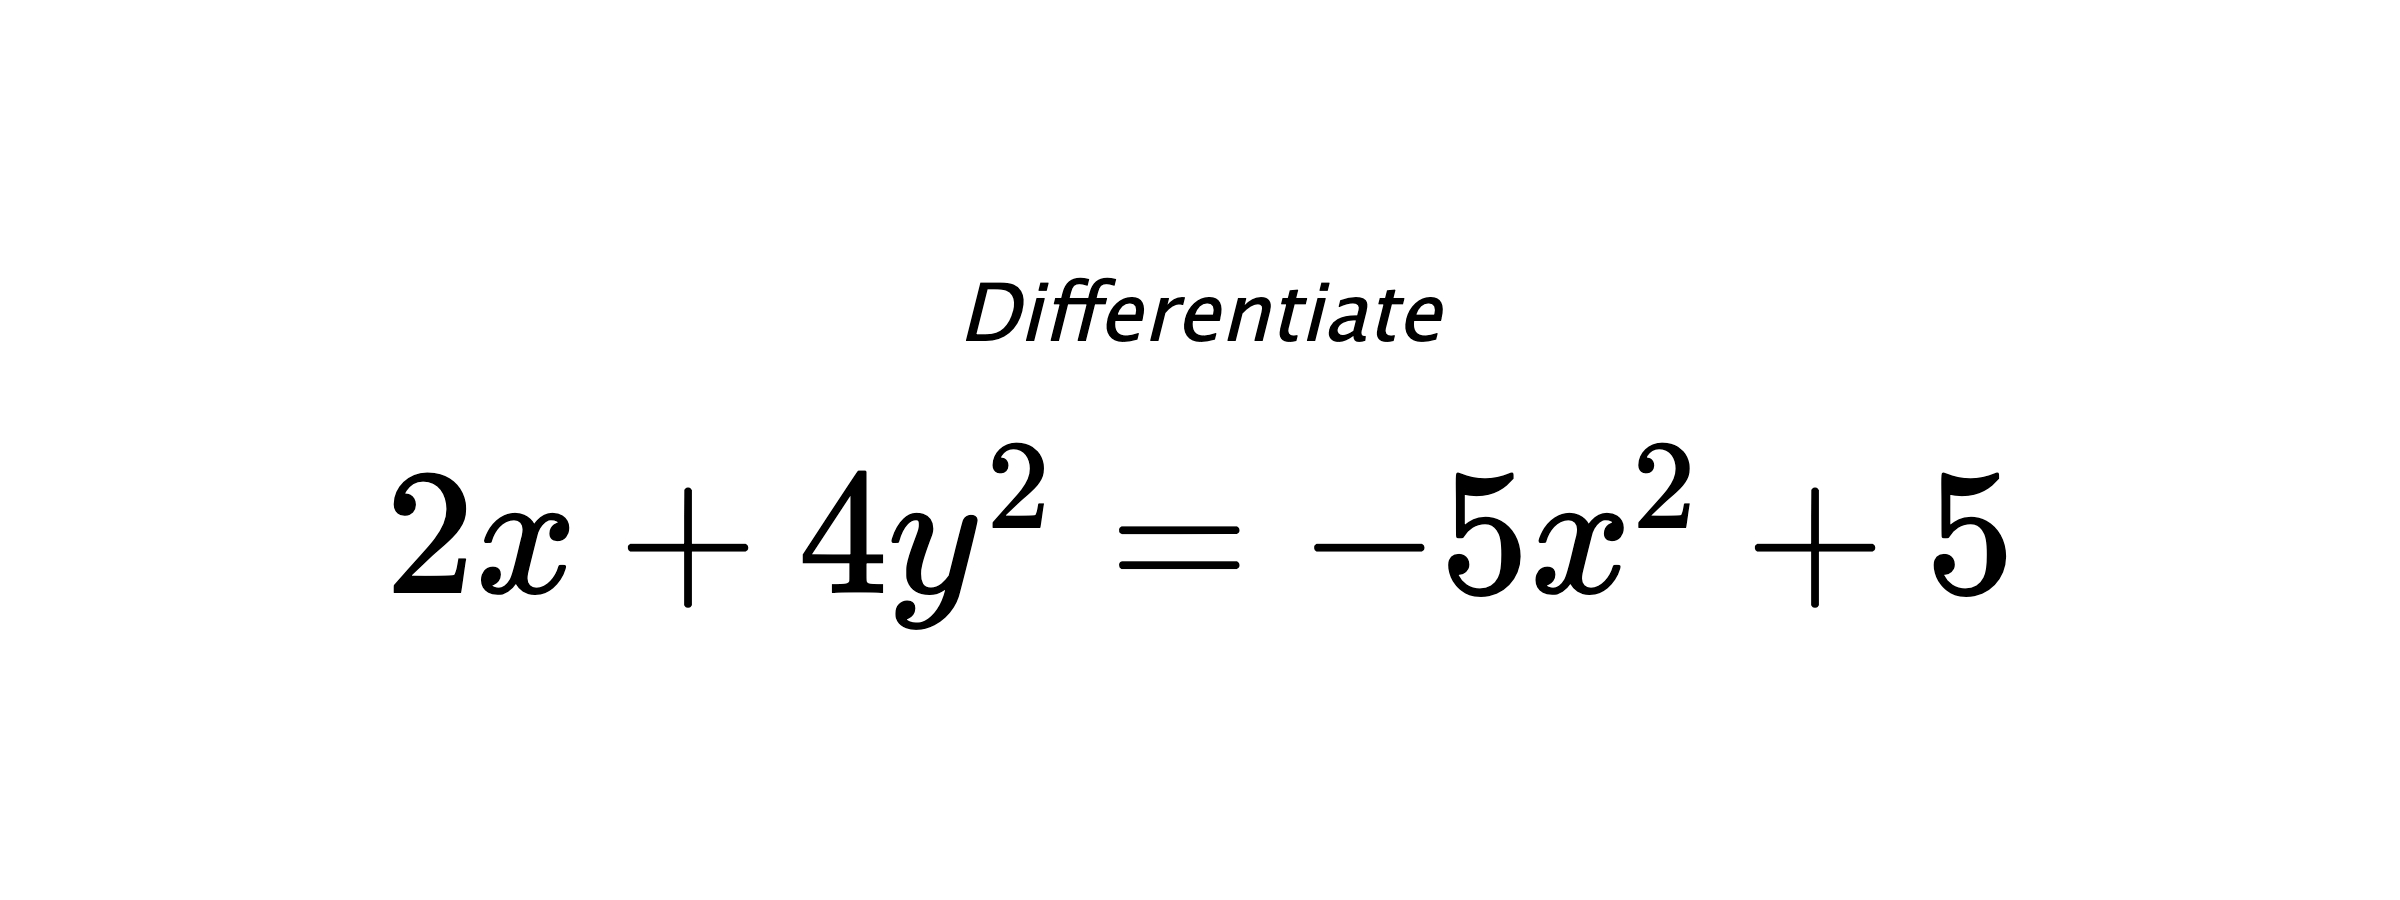 Differentiate $ 2x+4y^2=-5x^2+5 $